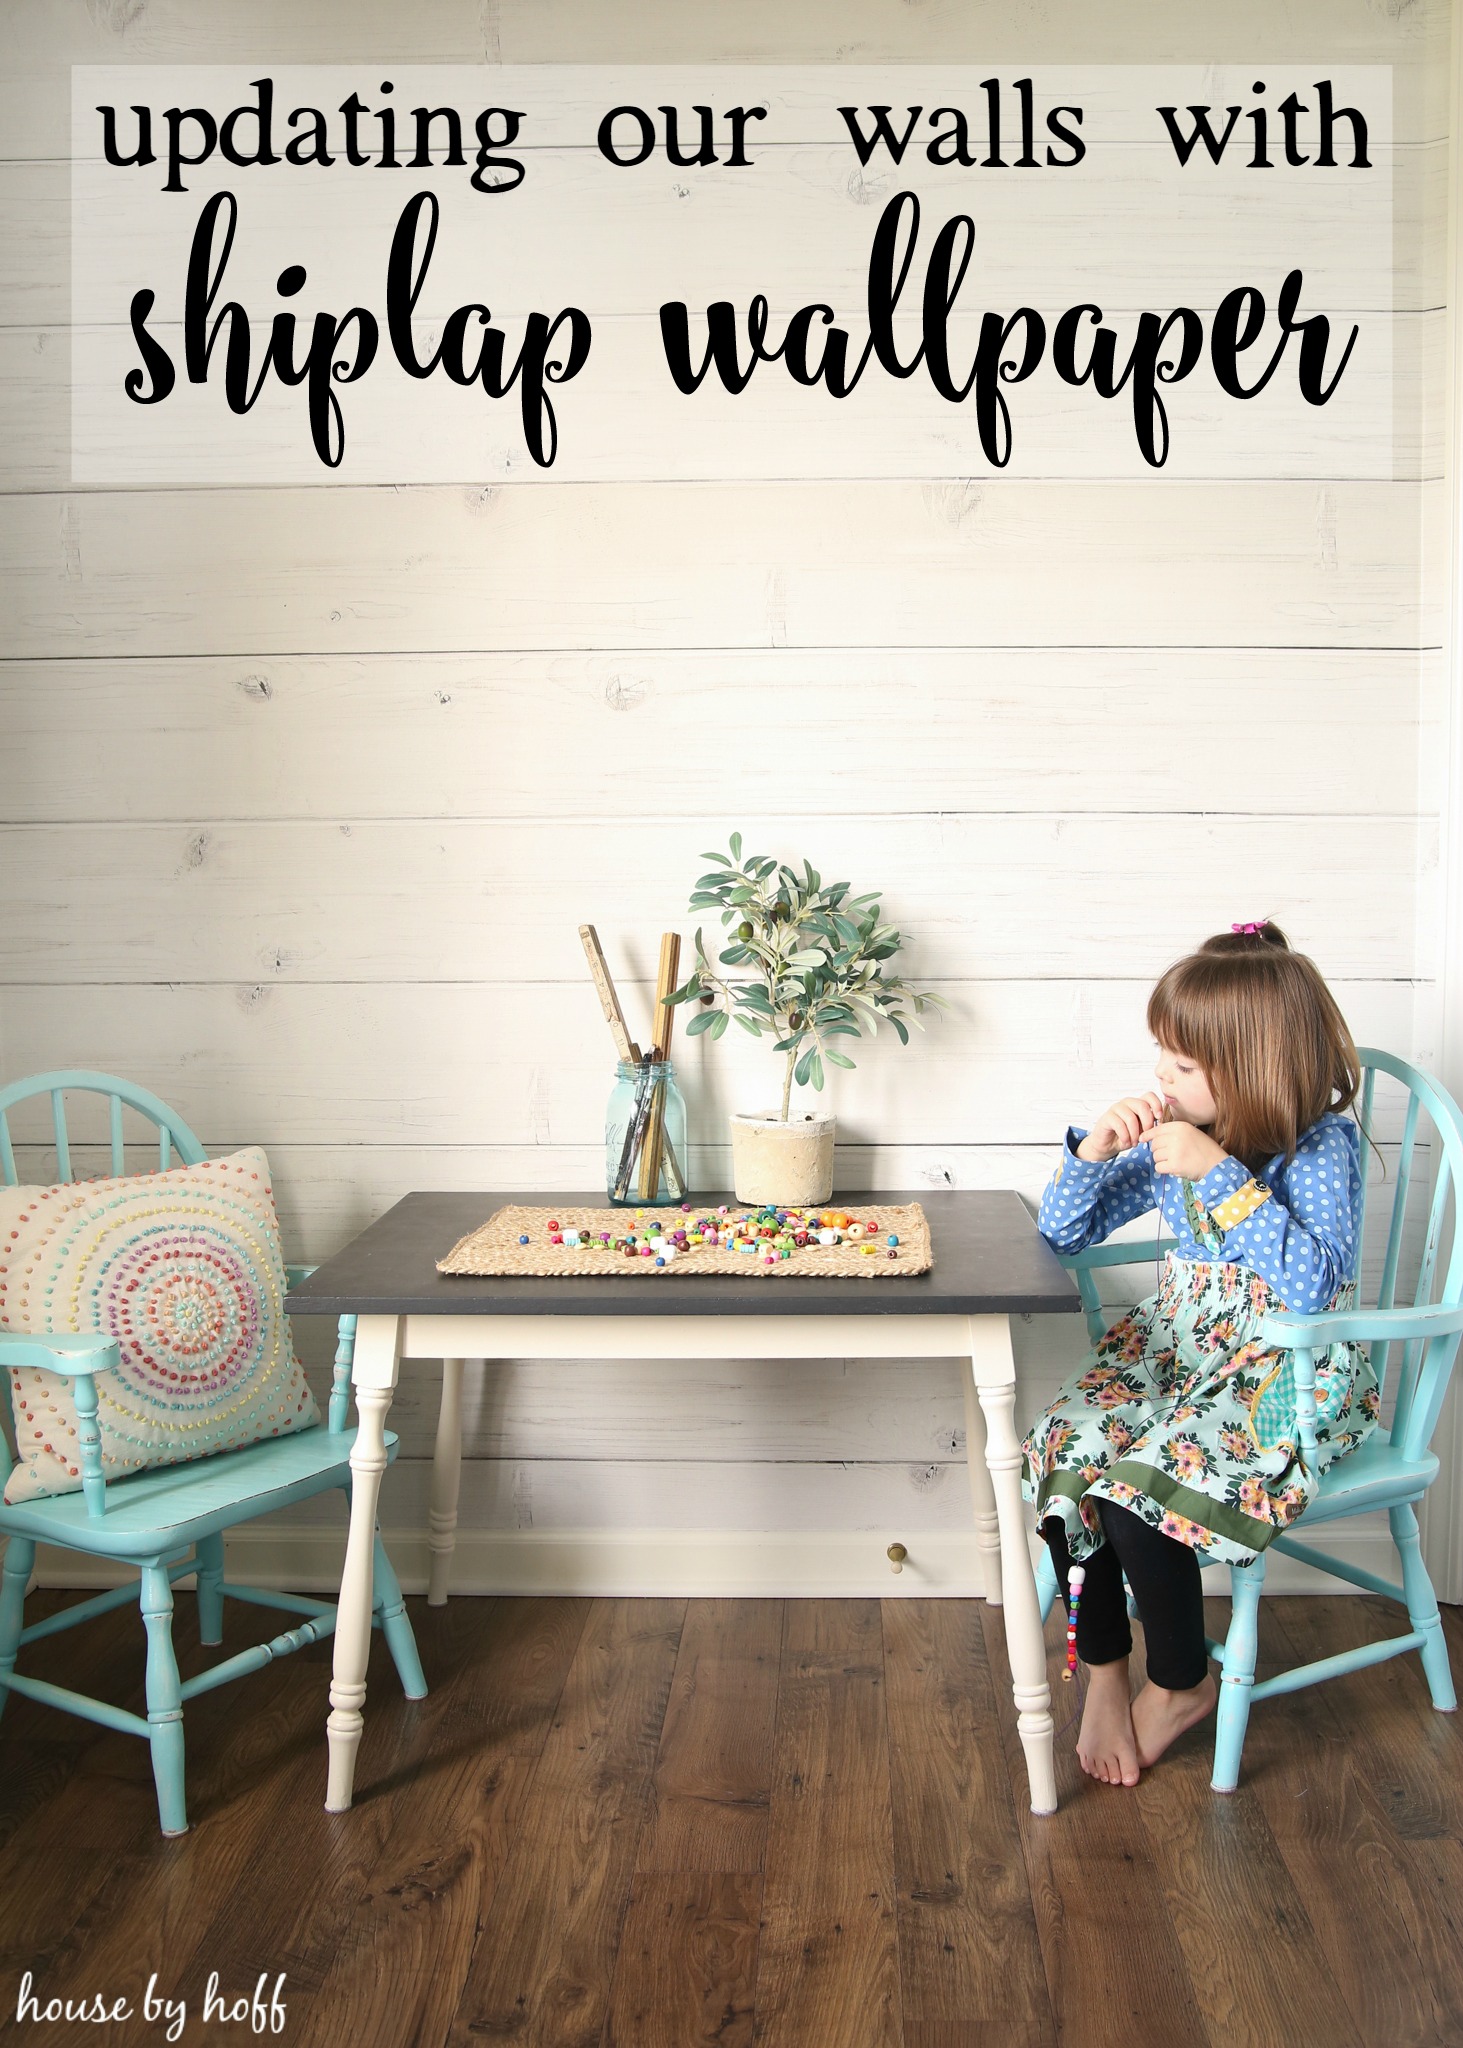 Table And Chairs And Little Girl Sitting At Table In - Does Shiplap Wallpaper Look Real - HD Wallpaper 